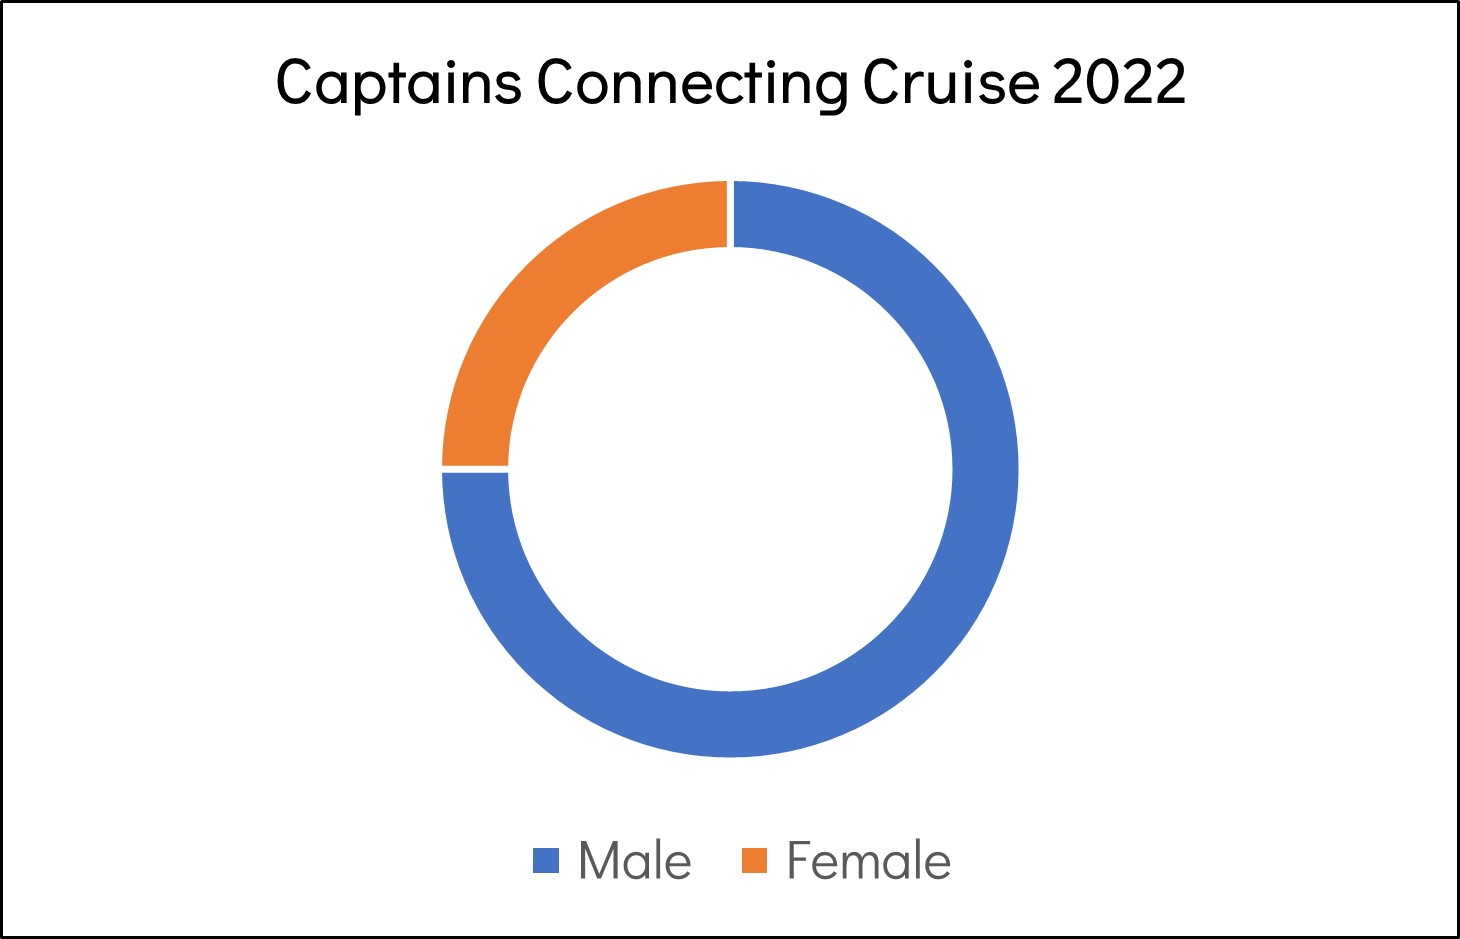 Connecting Cruise Captains' Gender